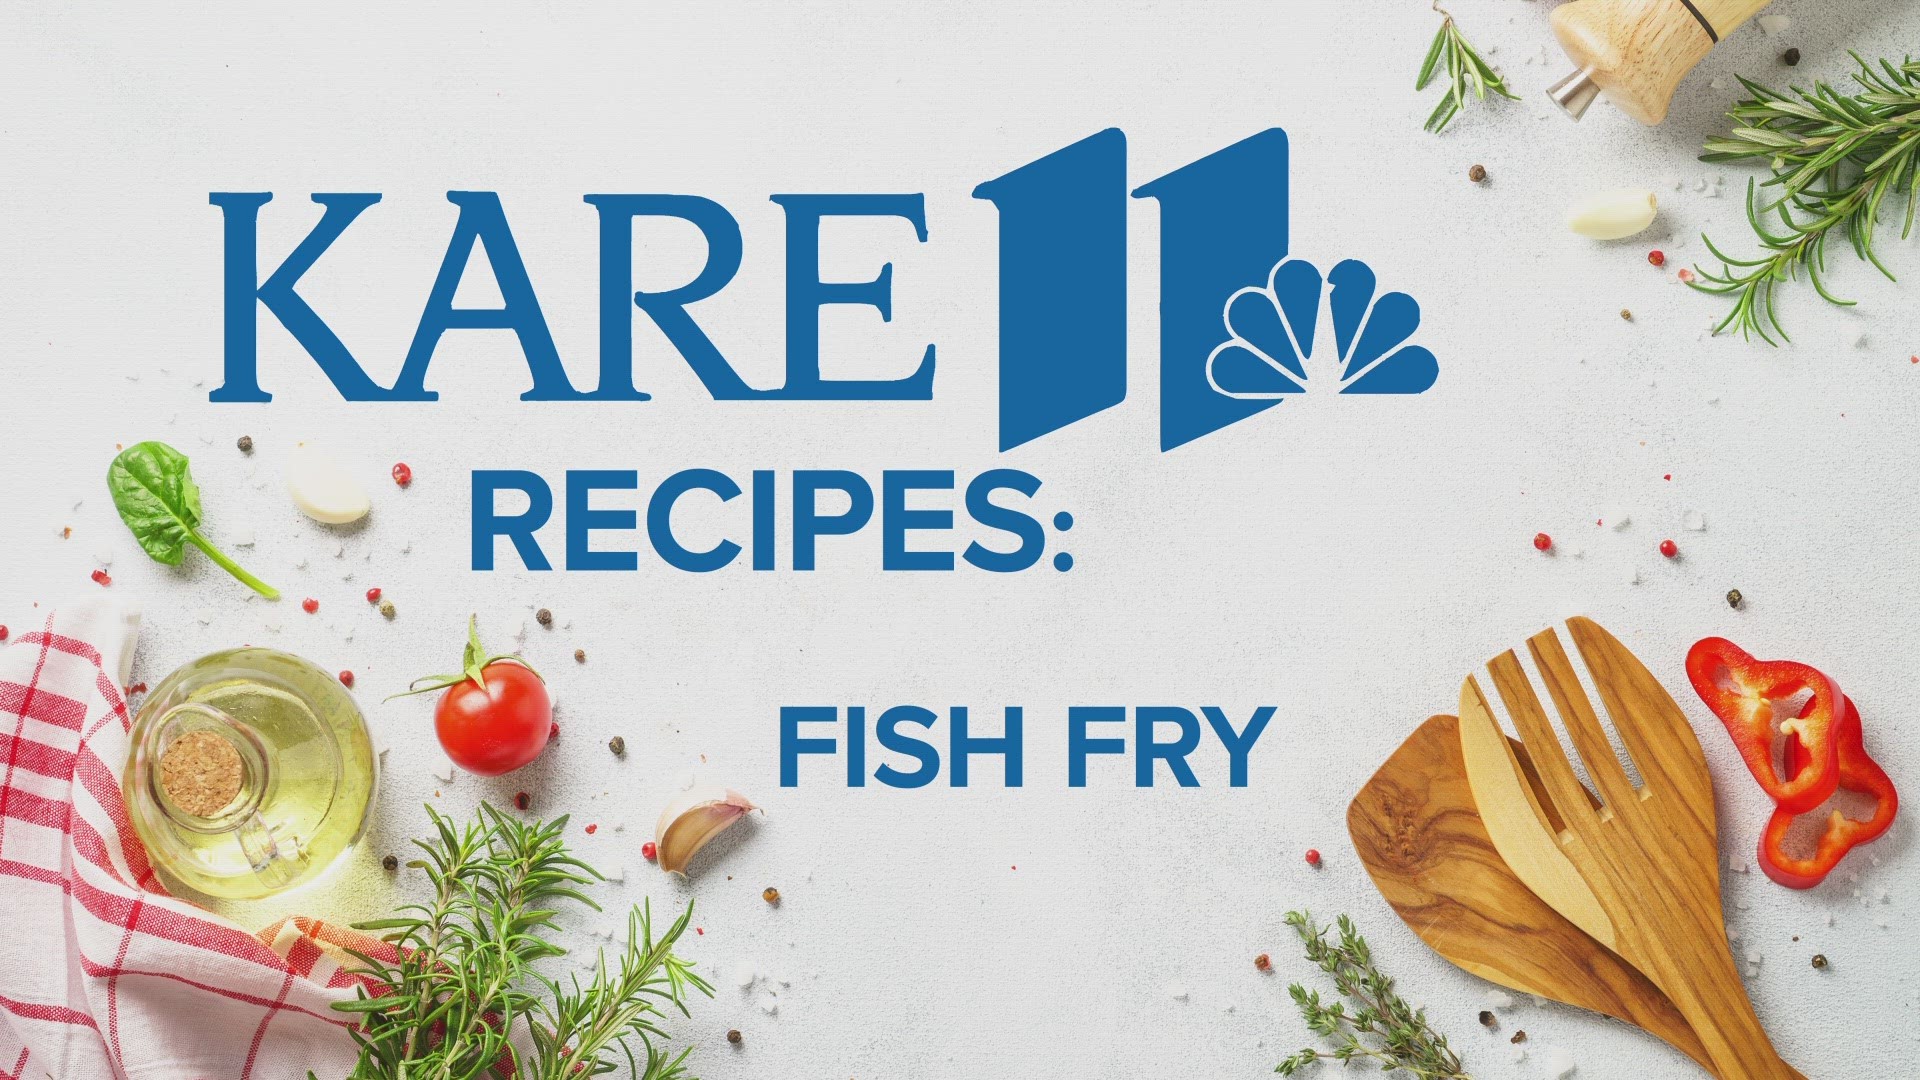 Here is a collection of recipes for fish from the KARE 11 archives.